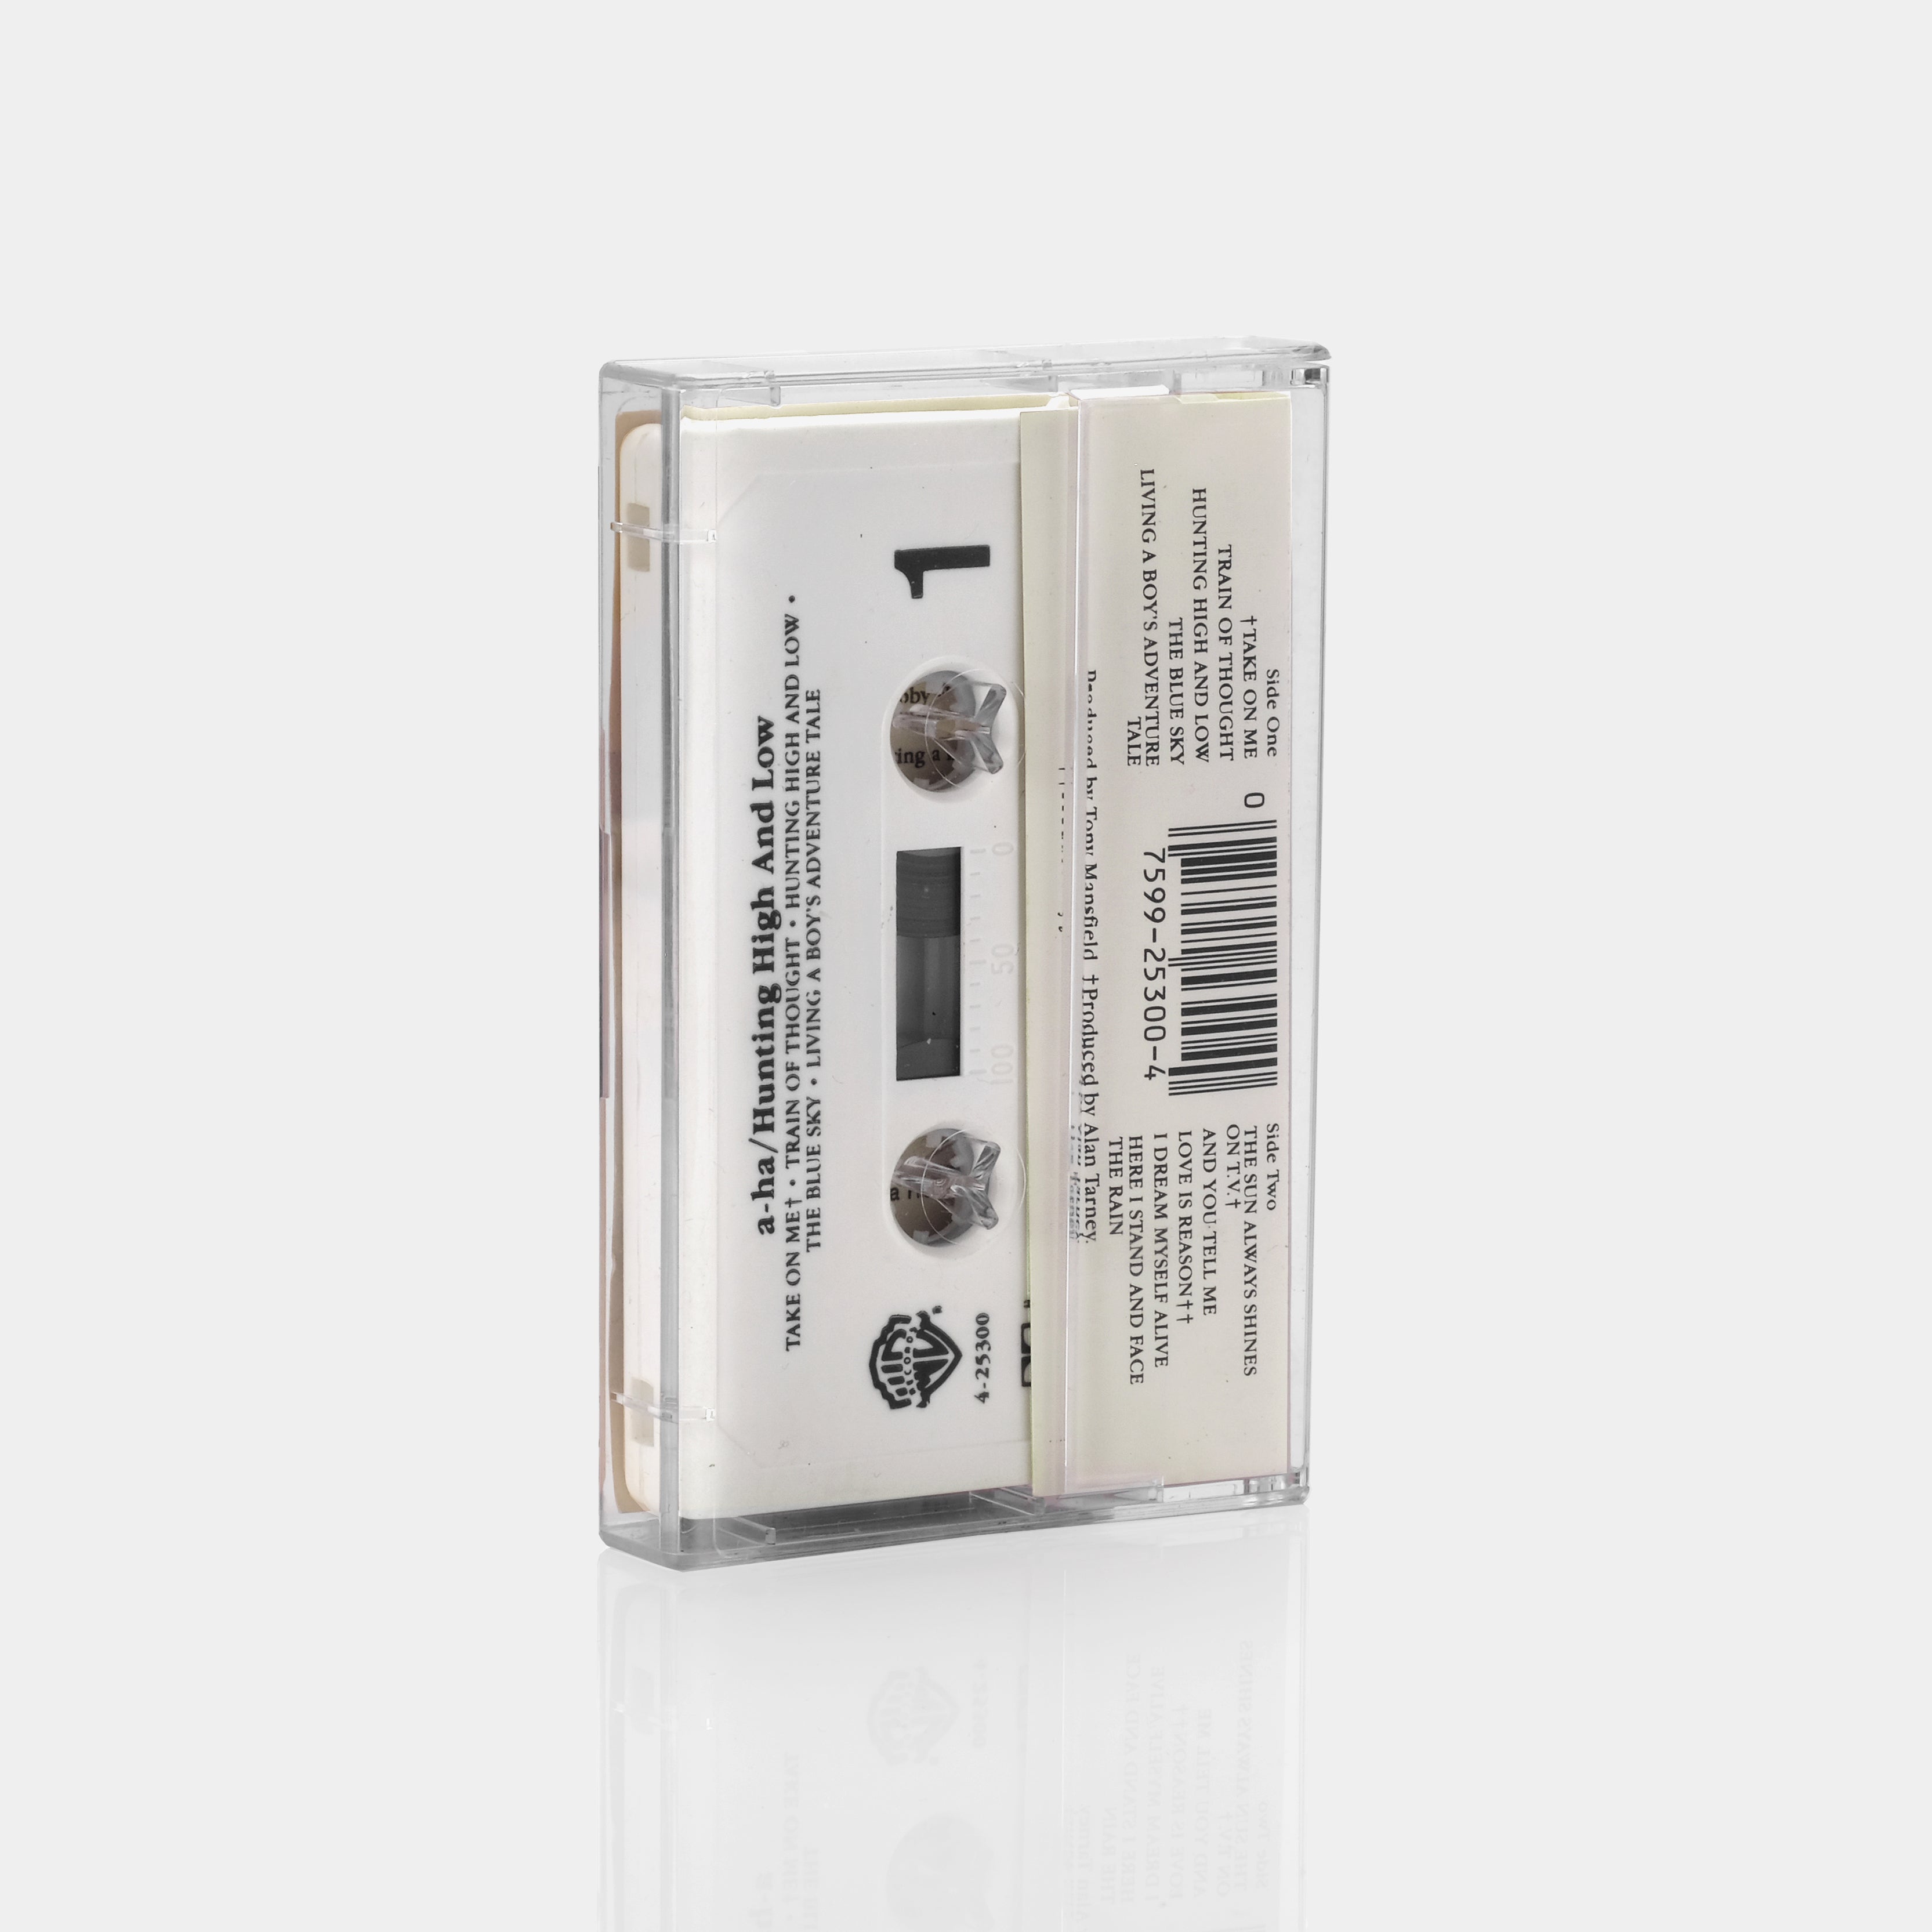 a-ha - Hunting High and Low Cassette Tape